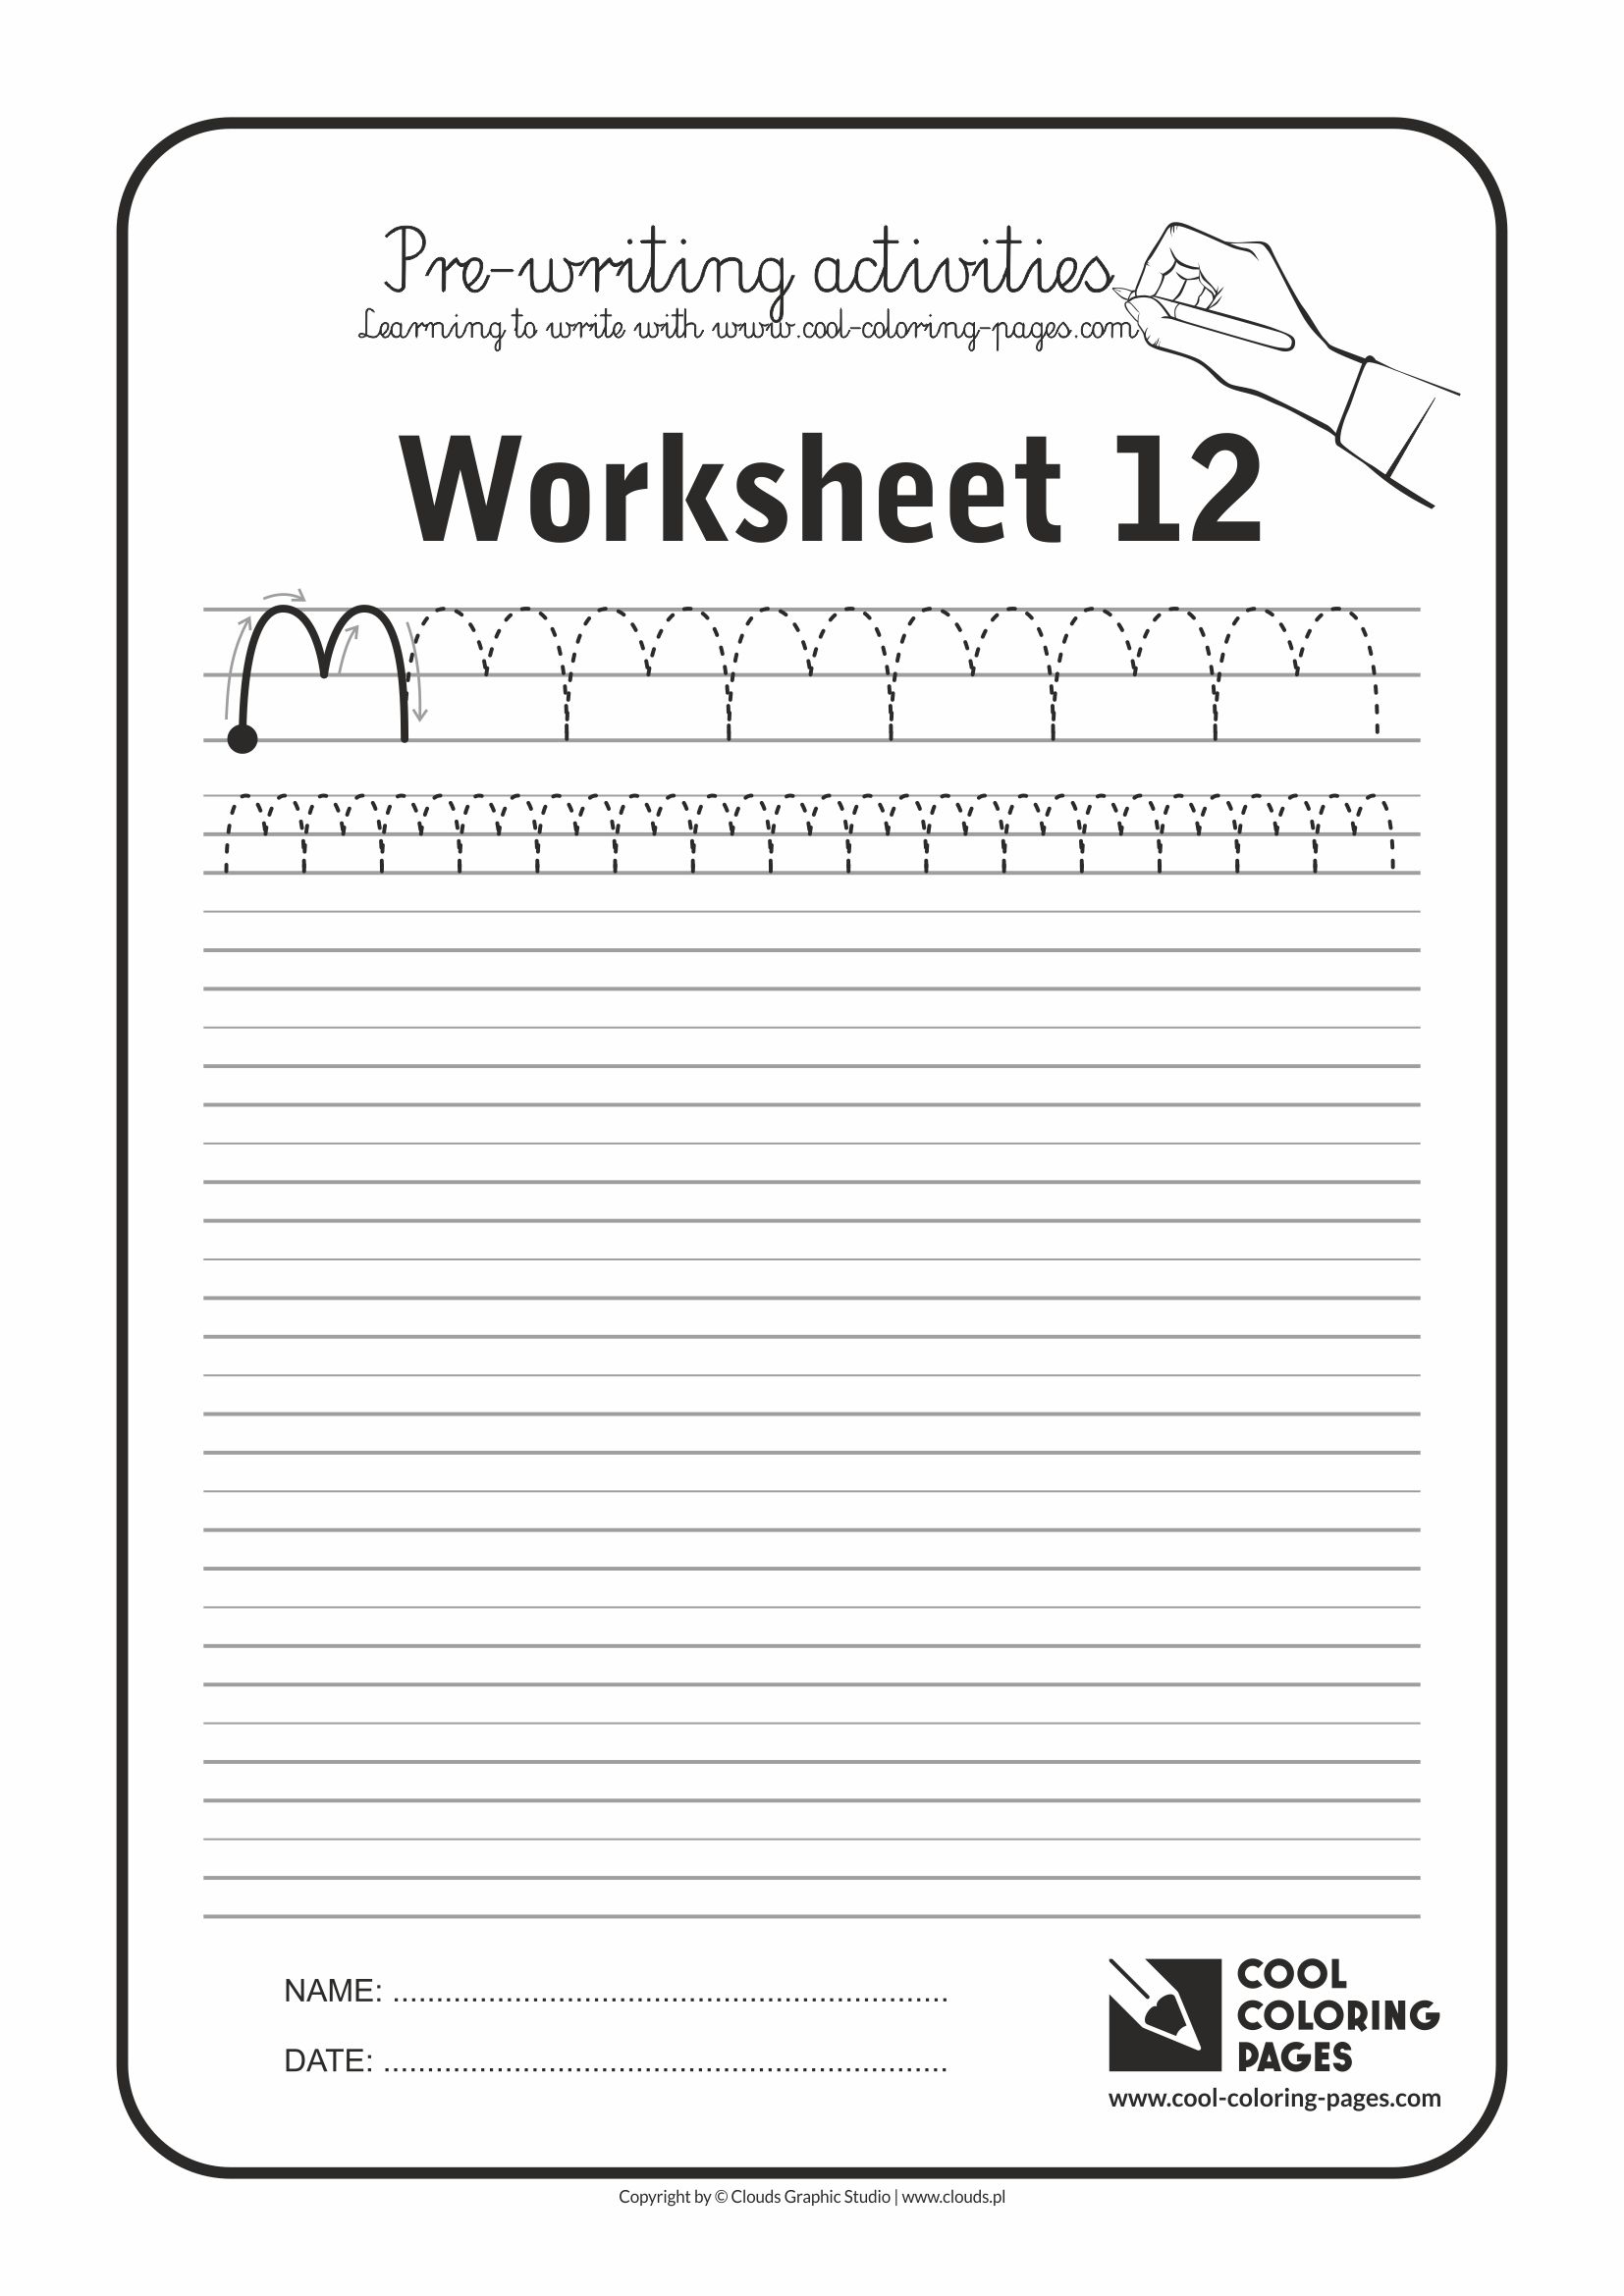 Cool Coloring Pages / Pre-writing activities / Worksheet no.12